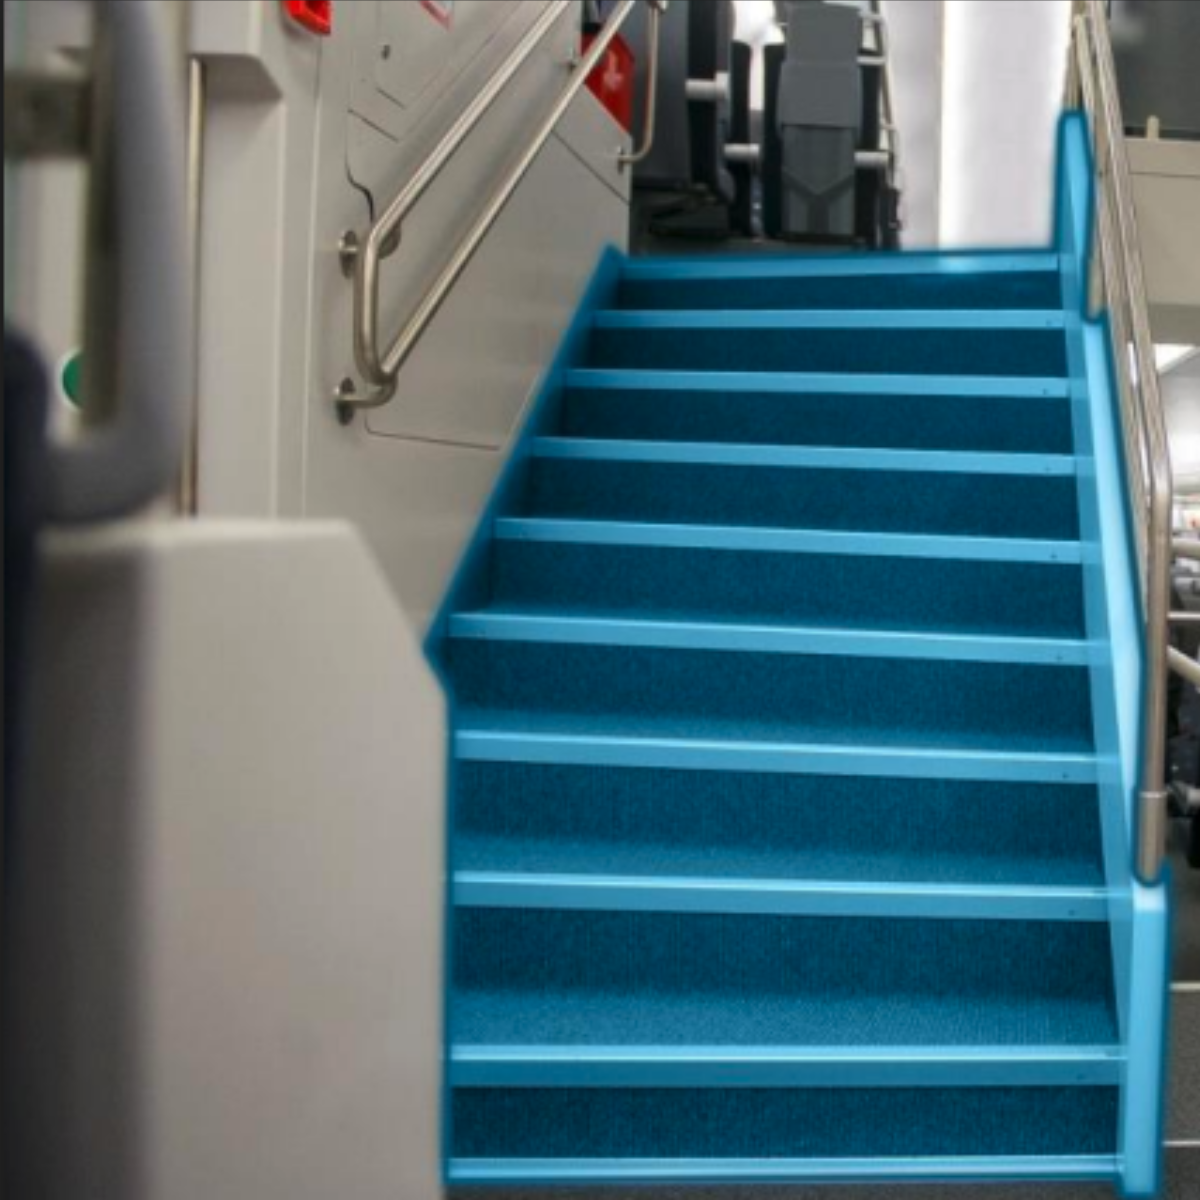 Our innovative solution INFIT®️ Lightstair- that provides a lightweight stair system, designed to facilitate installation on any type of single or double-deck train in minimum time and with maximum precision. It also allows to reduce the amount of personnel and complementary equipment required for its installation.